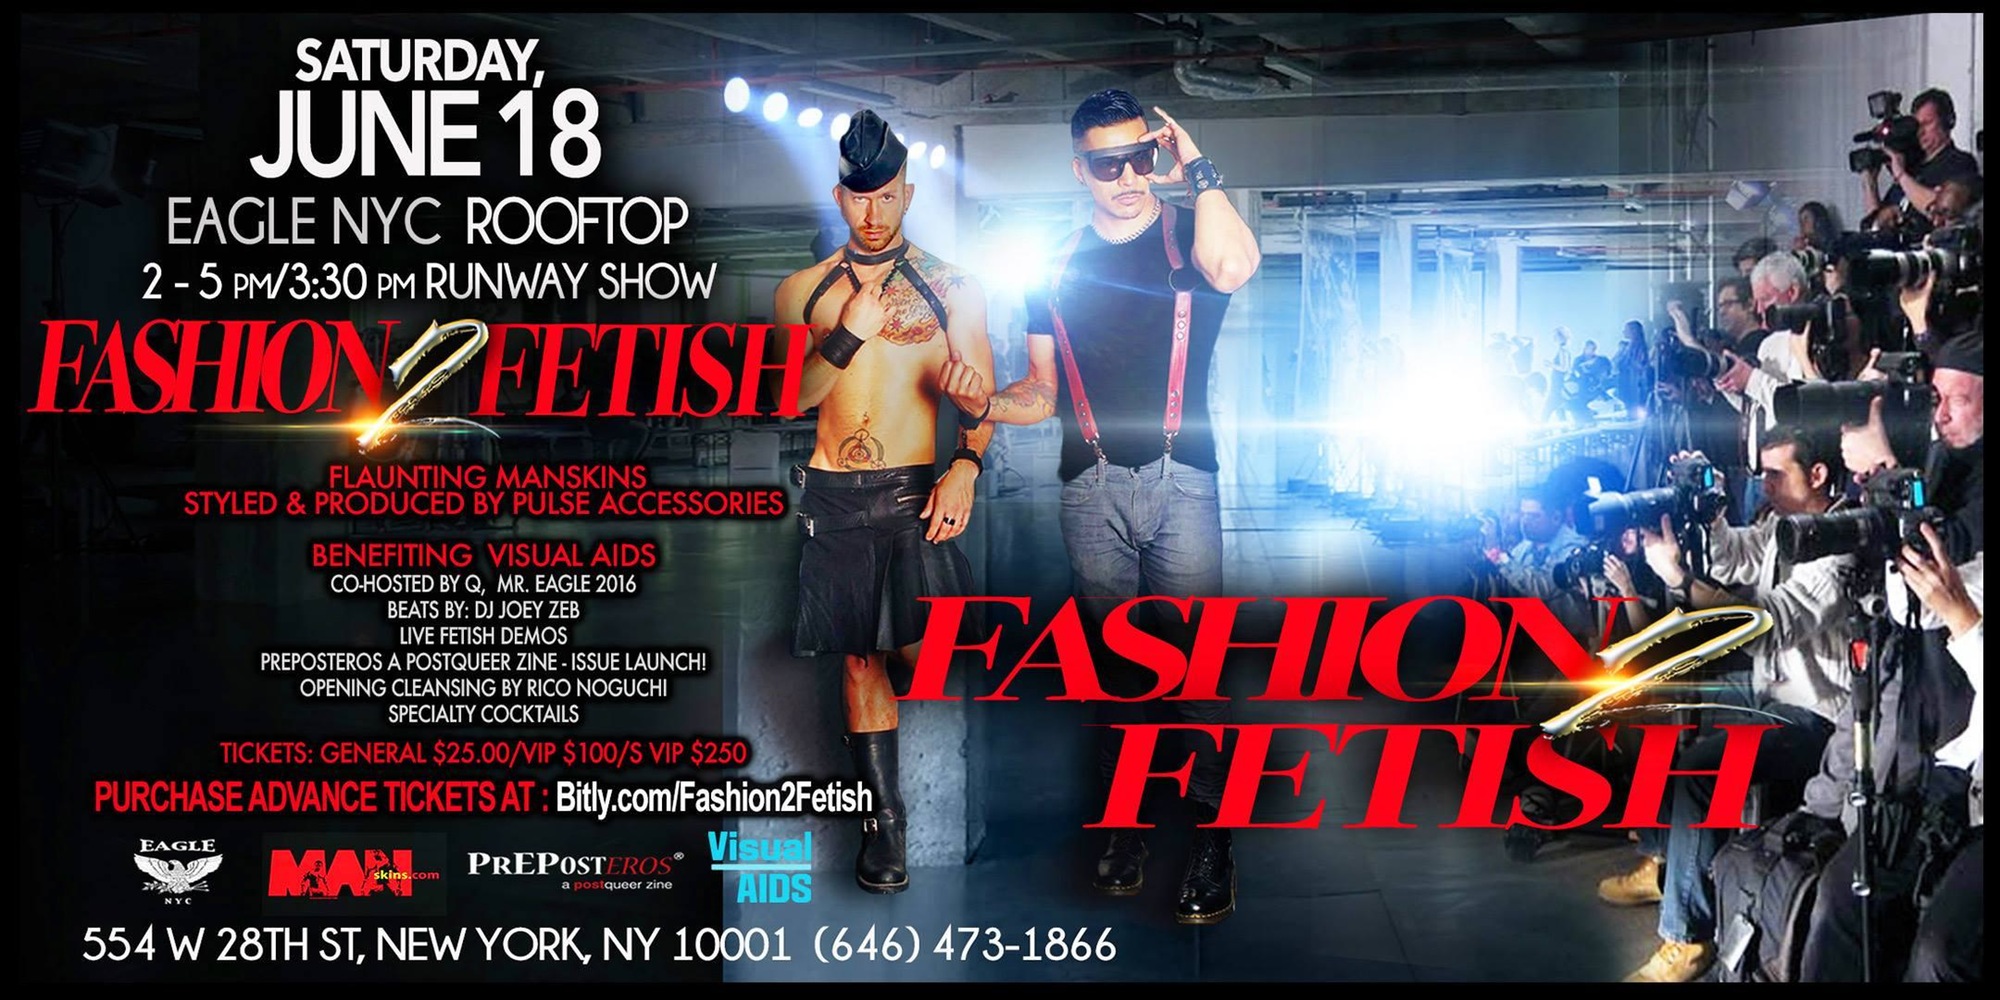  FASHION 2 FETISH RUNWAY SHOW & ROOFTOP PARTY